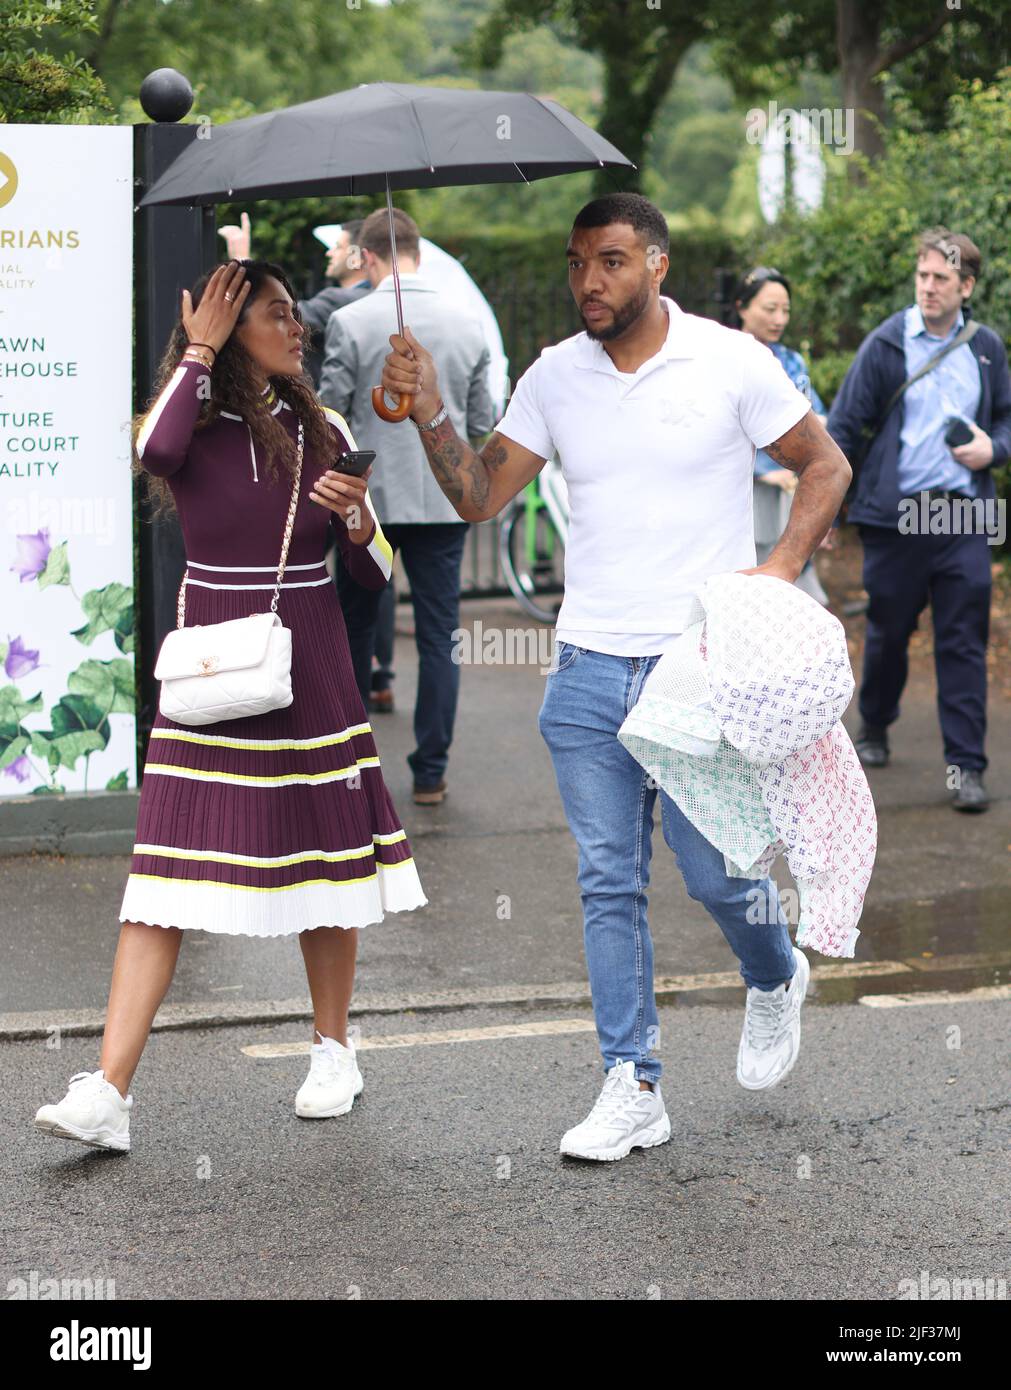 Birmingham City Striker Troy Deeney and Alisha Hosannah arriving at day three of the 2022 Wimbledon Championships at the All England Lawn Tennis and Croquet Club, Wimbledon. Stock Photo